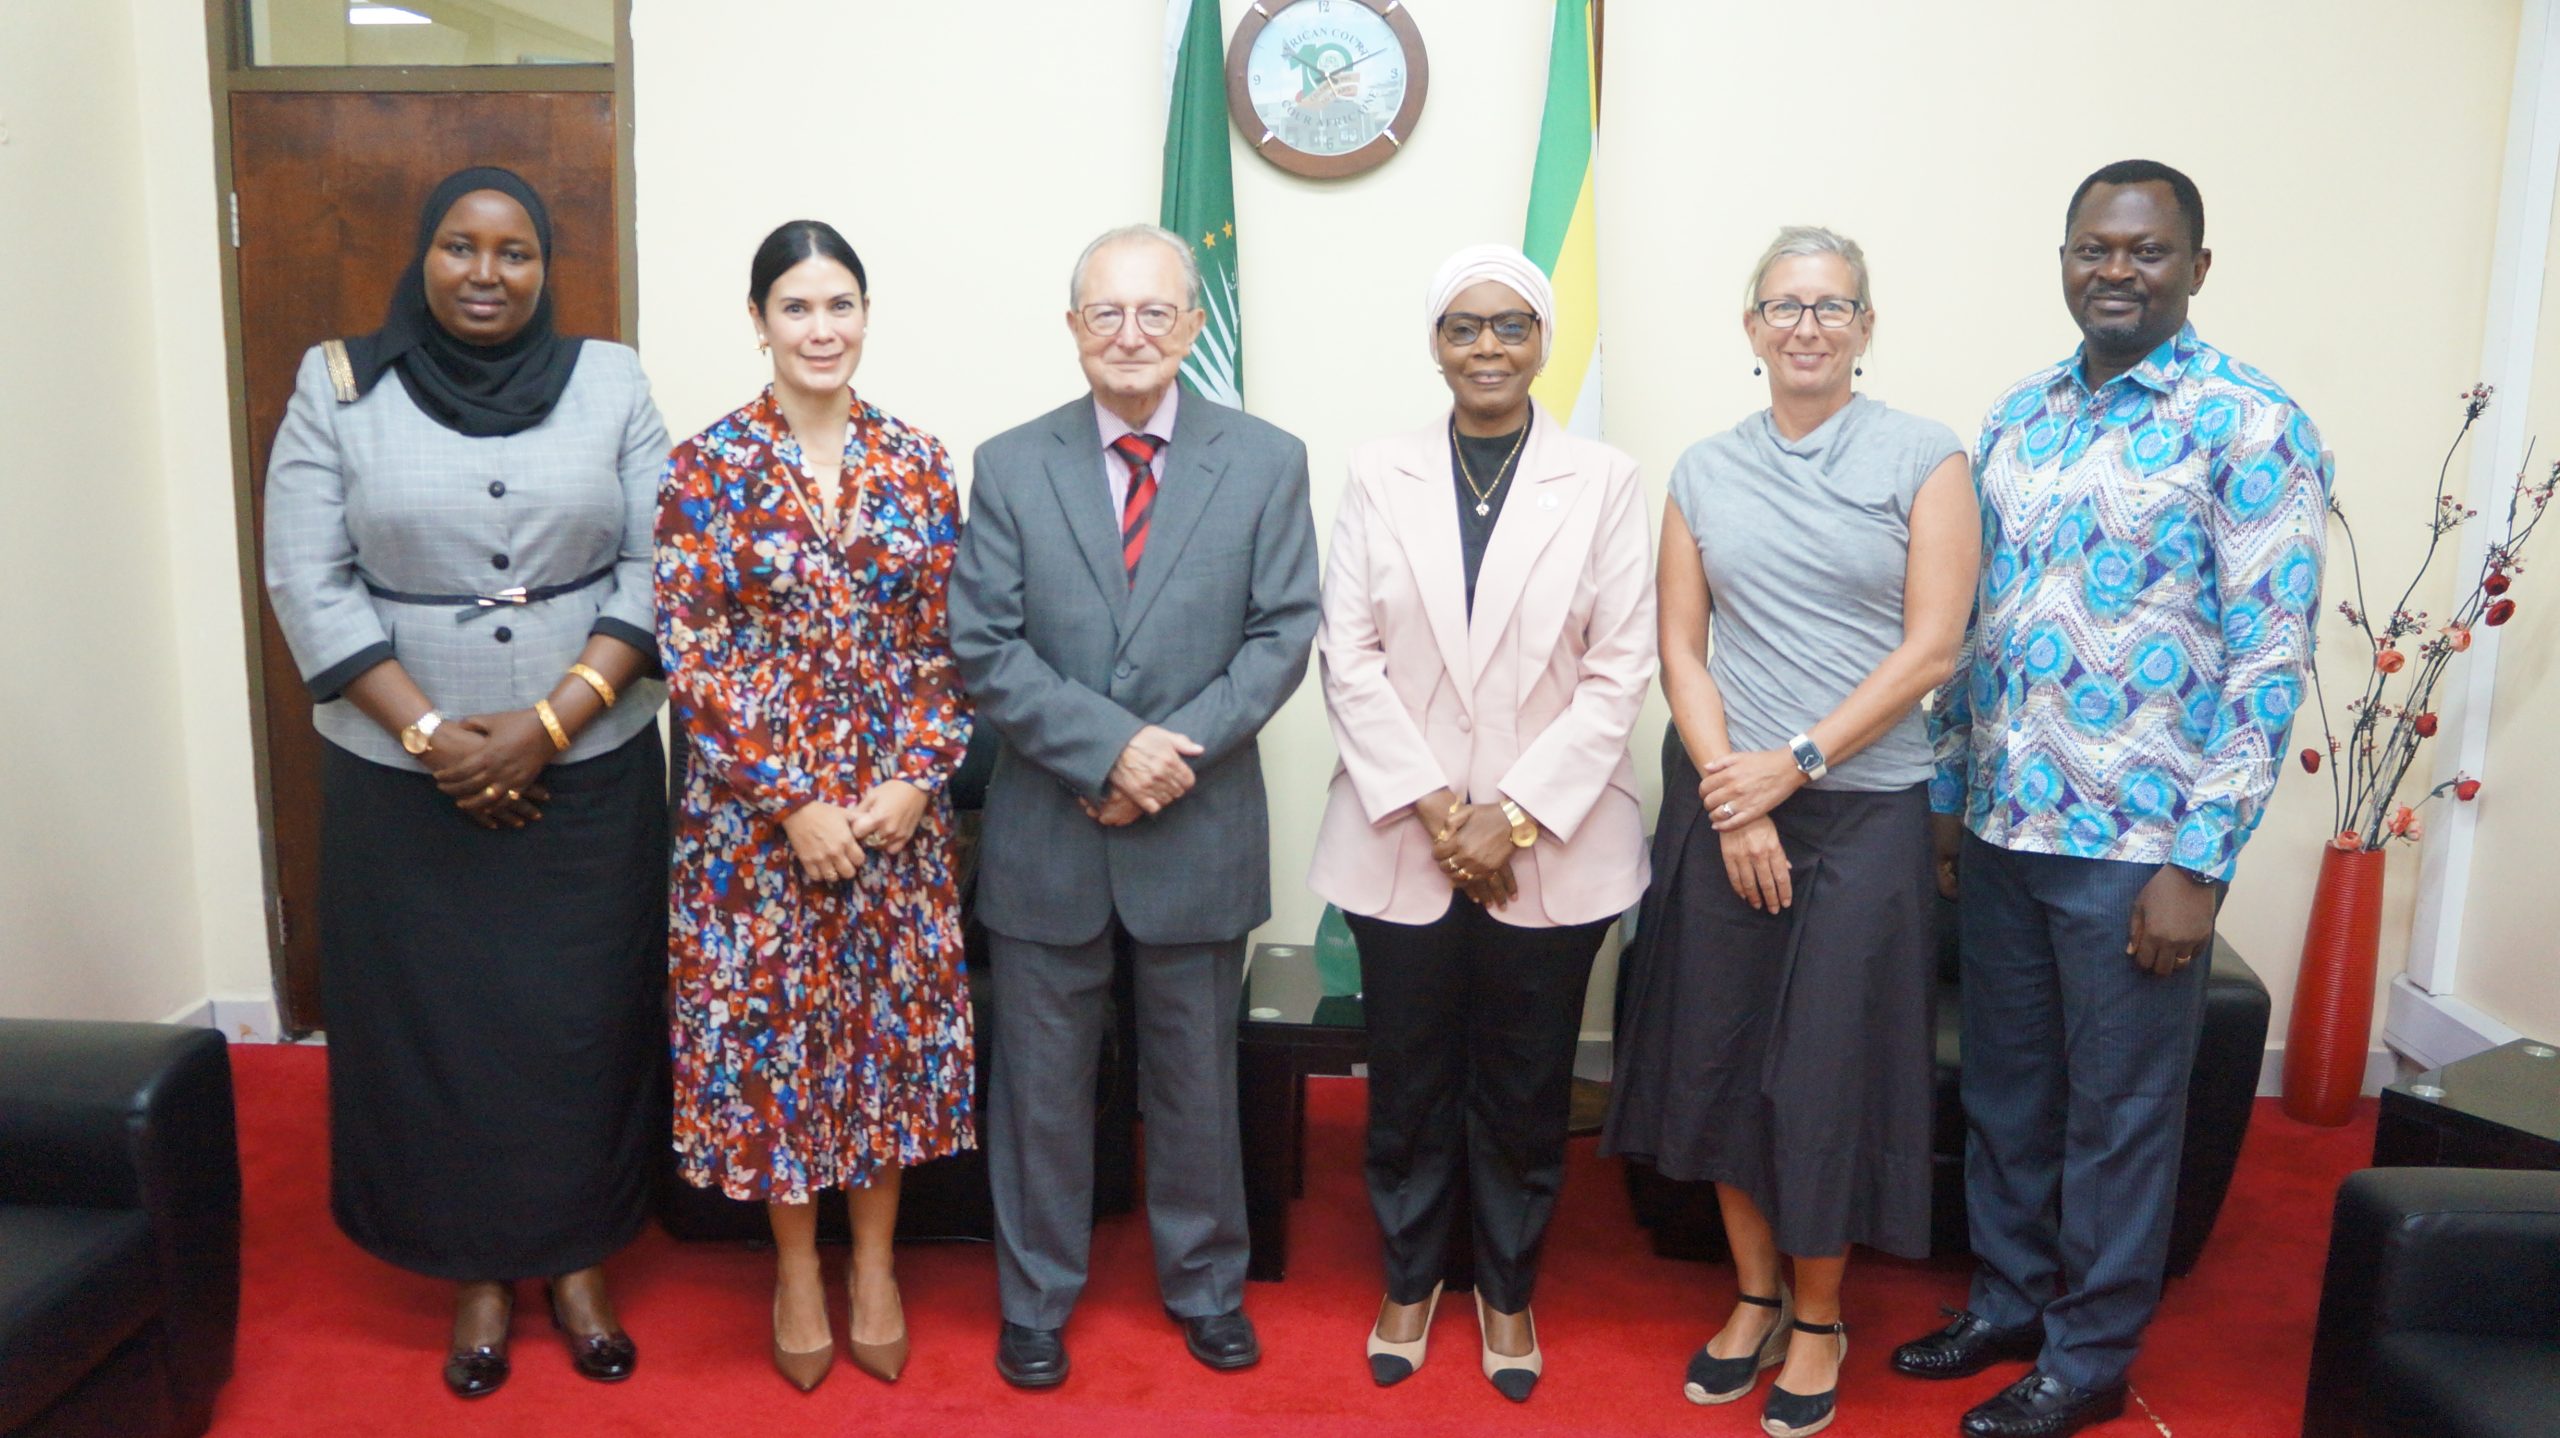 PRESIDENT OF  THE UN INTERNATIONAL RESIDUAL MECHANISM FOR CRIMINAL TRIBUNALS PAYS COURTESY VISIT TO THE AFRICAN COURT